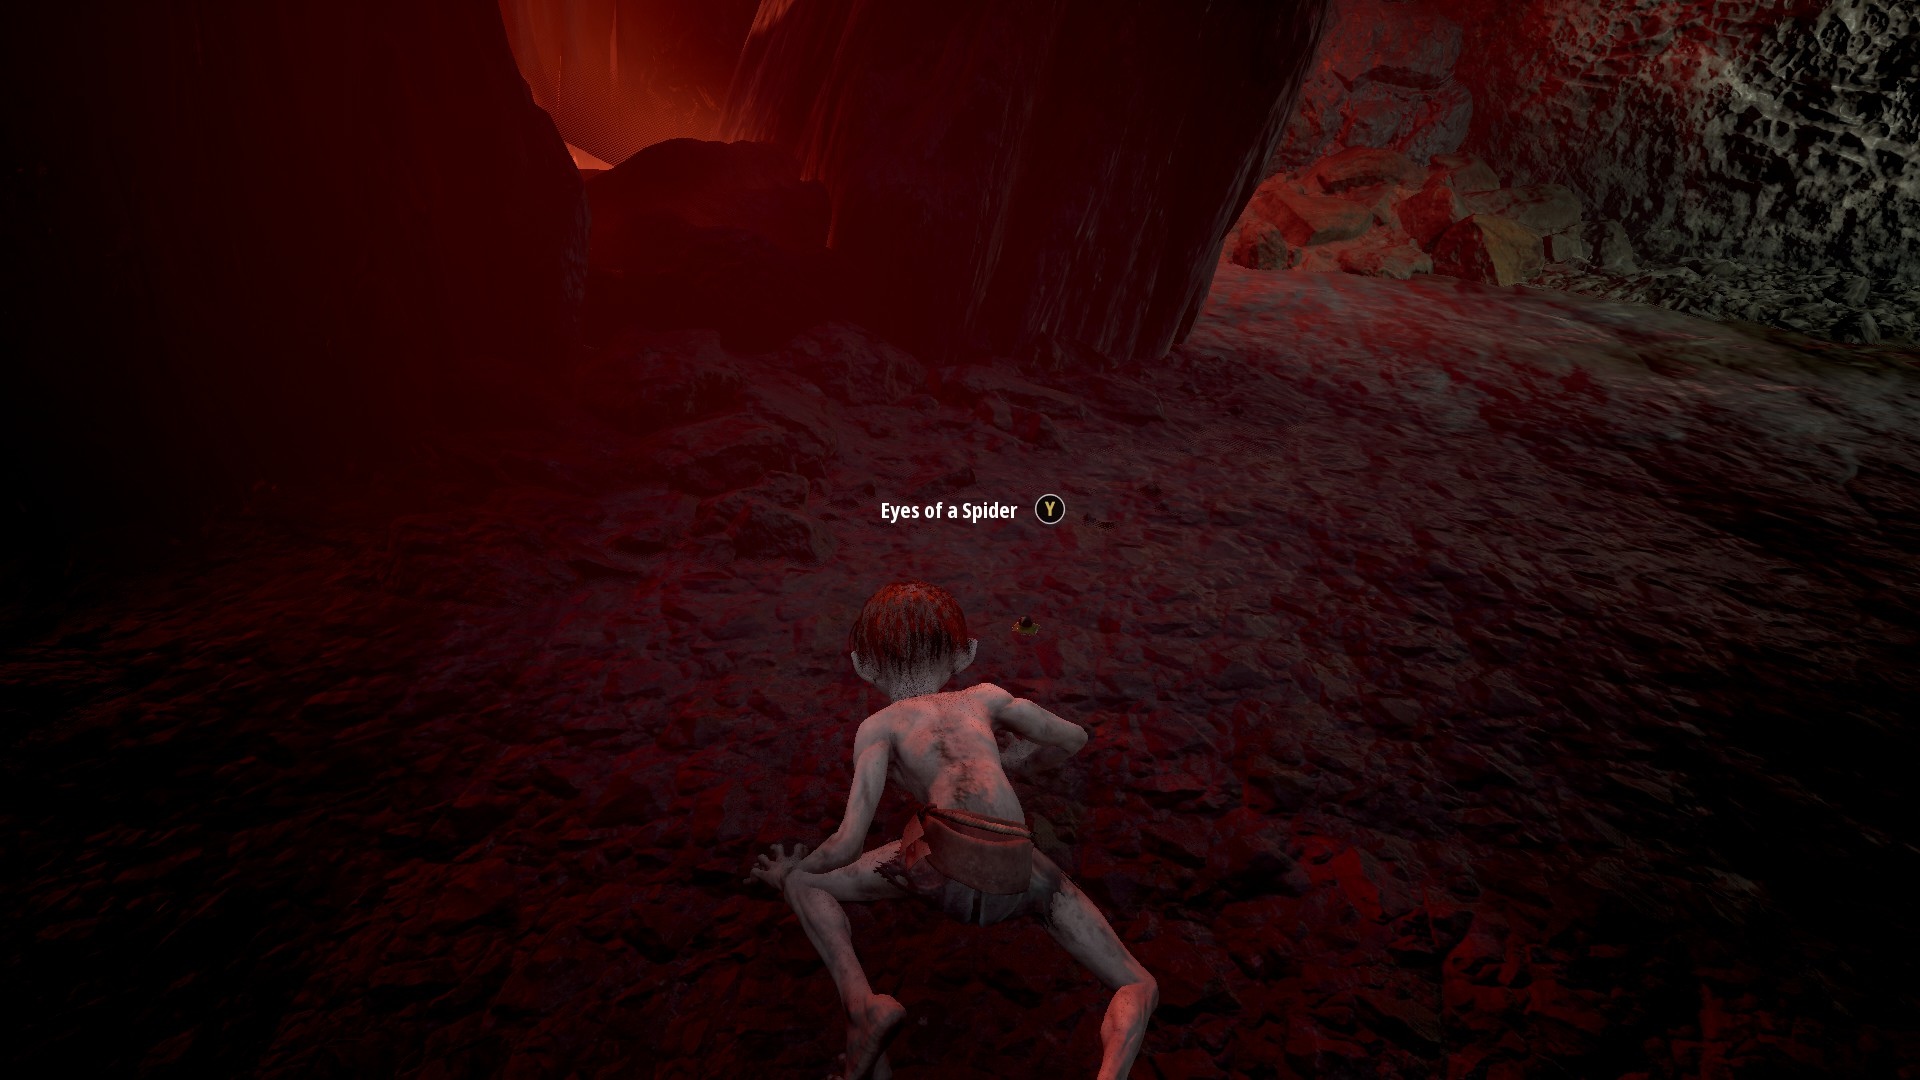 Gollum screenshot showing Gollum crawling low to the ground in a dark cave. 